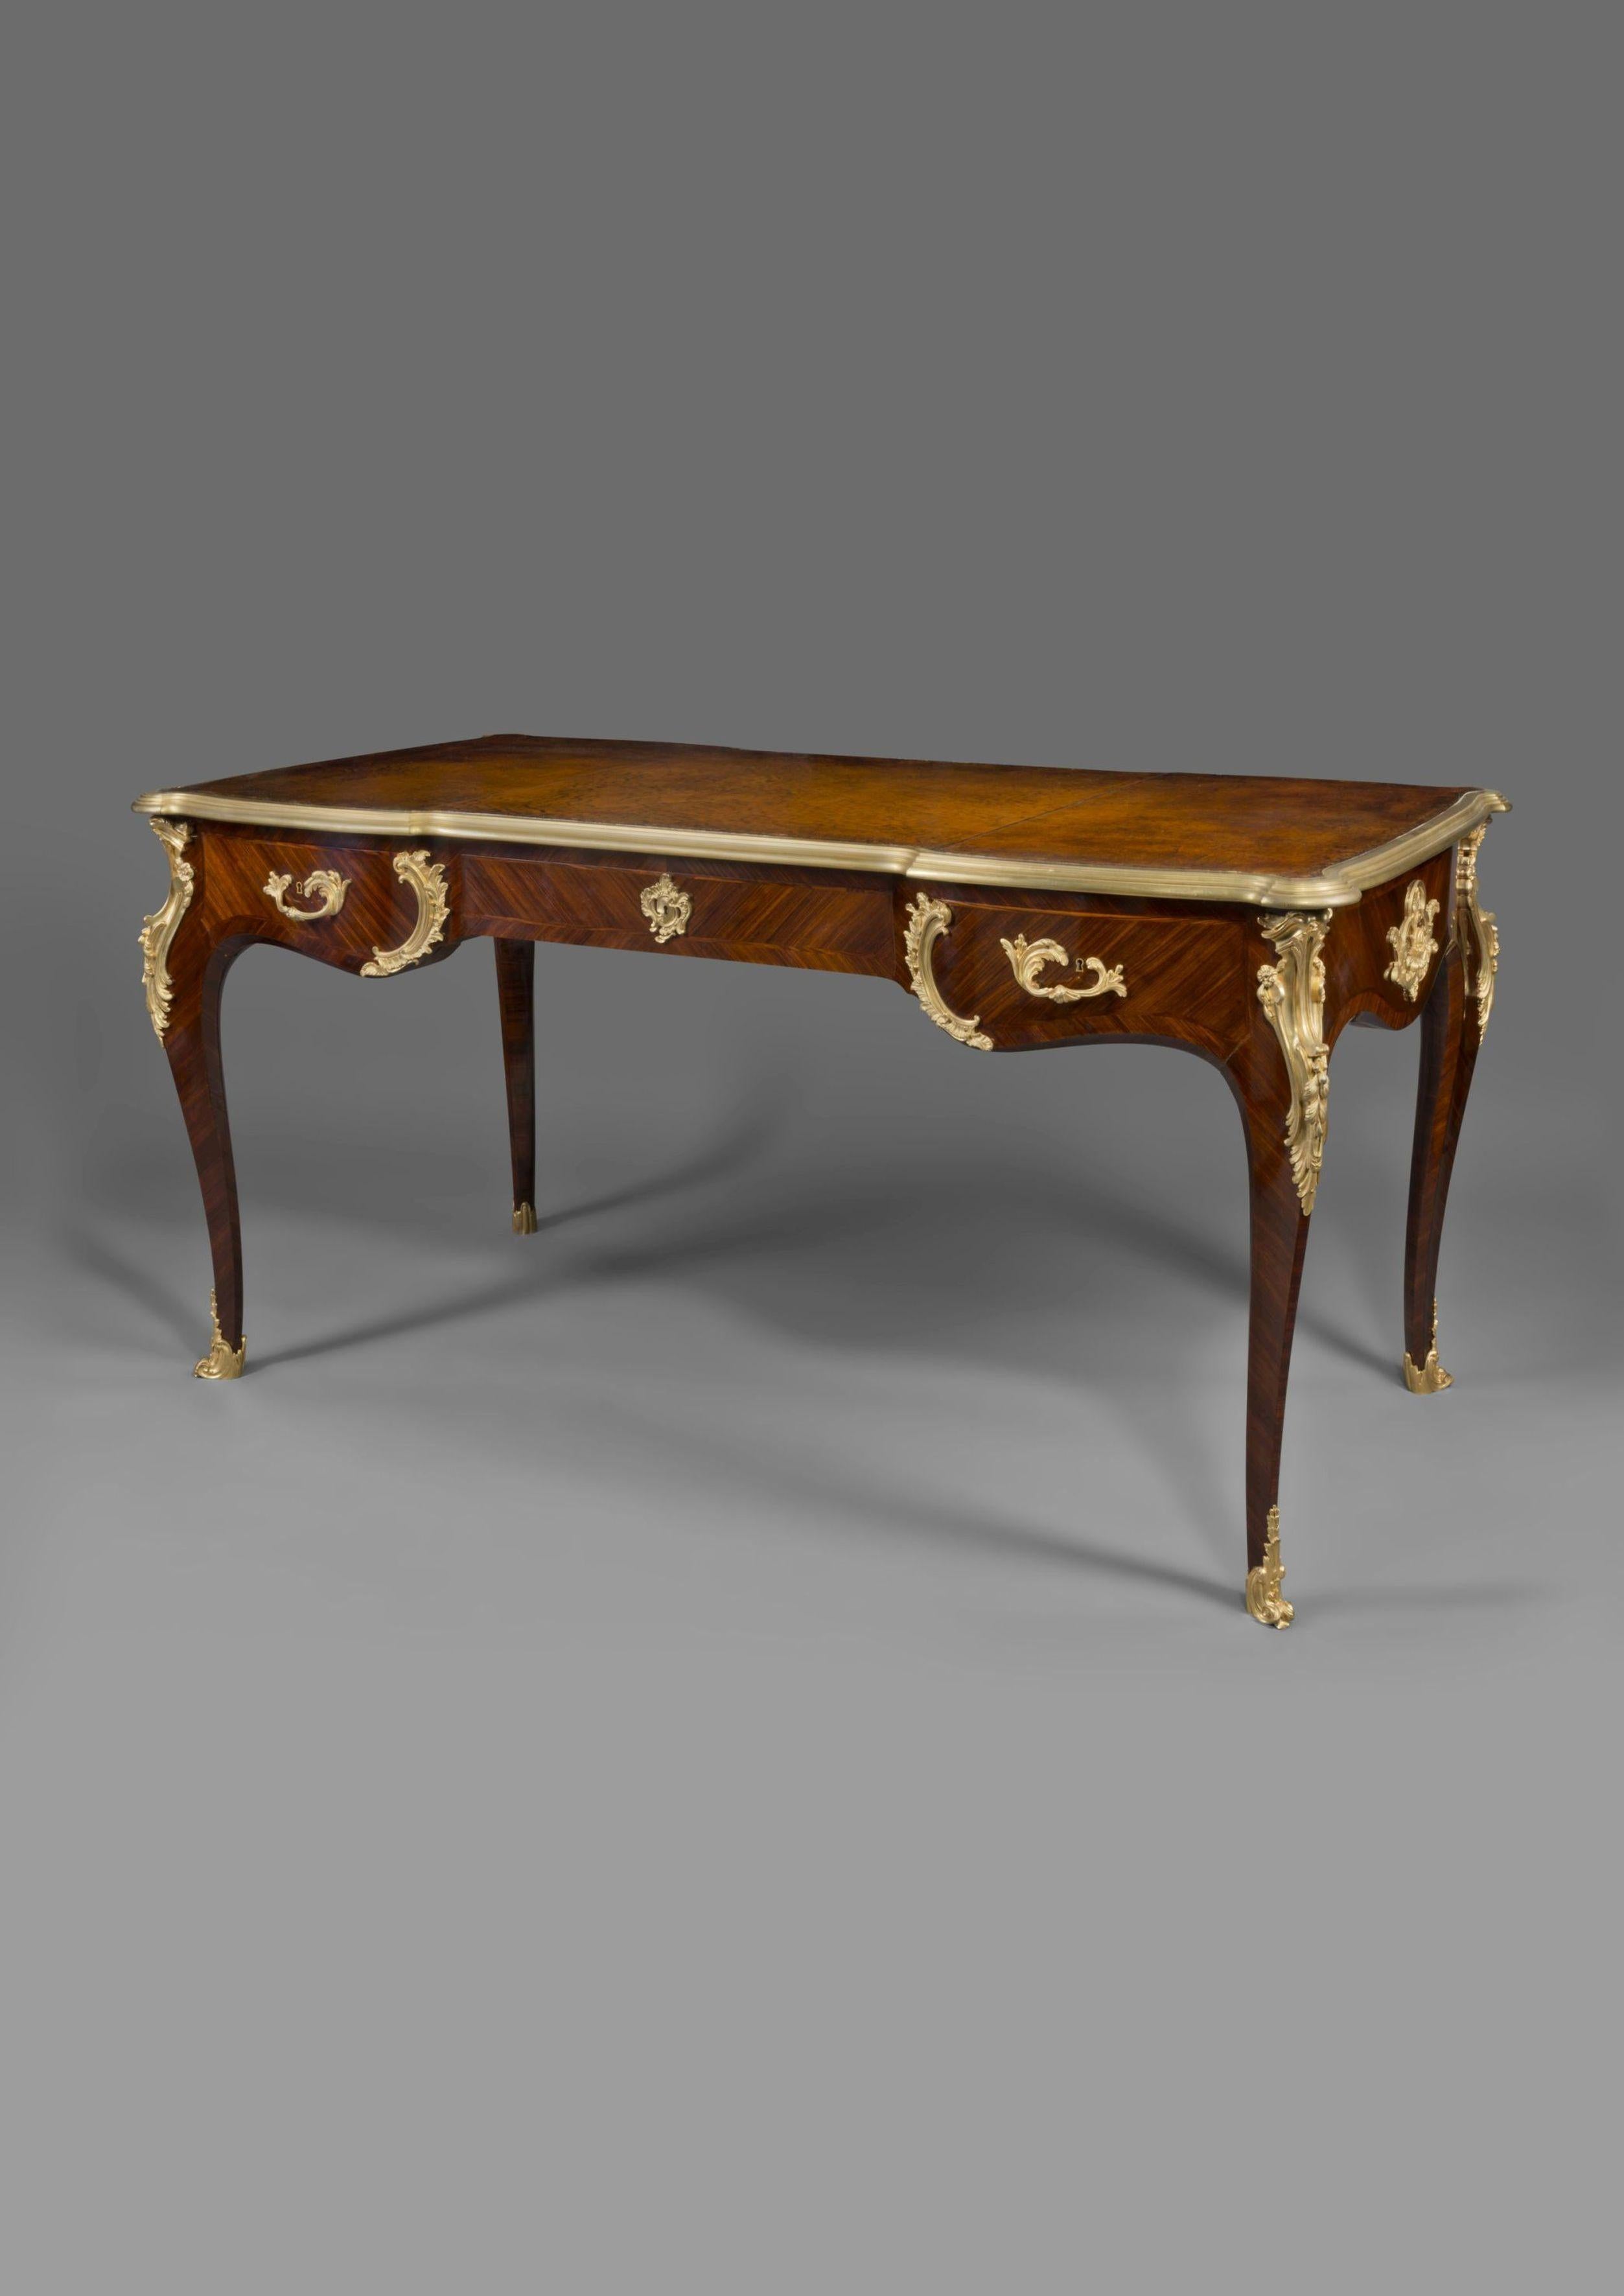 A Louis XV style gilt-bronze mounted bureau plat in the manner of Charles Cressent.

French, circa 1890. 

With one central frieze drawer and two shaped end drawers, on cabriole legs with scrolled foliate sabots

Charles Cressent (1685-1768)